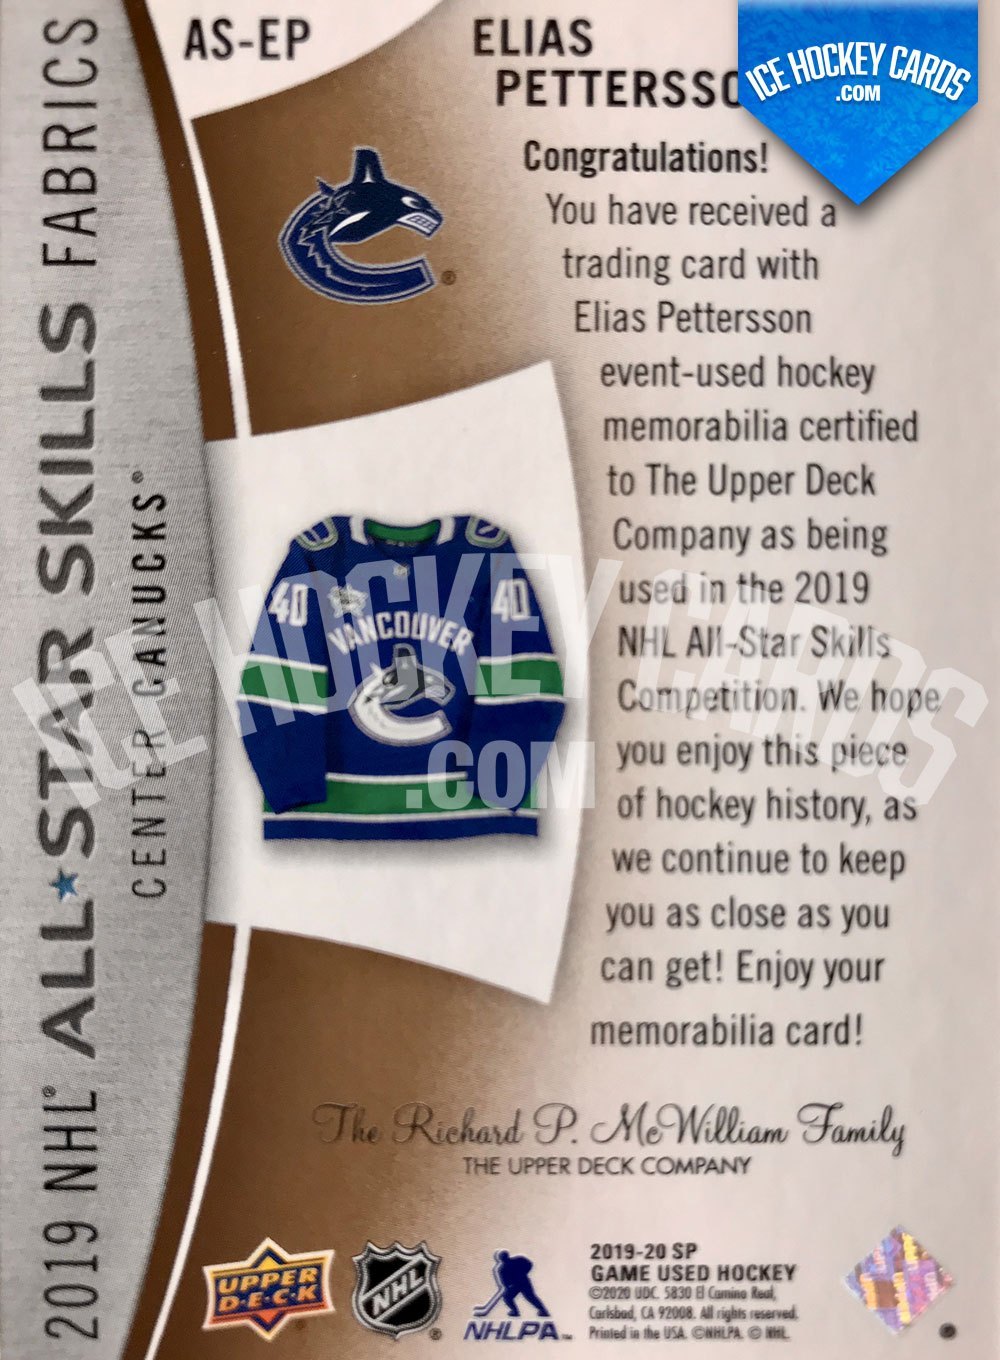 Upper Deck - SP Game Used Hockey 2019-20 - Elias Pettersson 2019 NHL All-Star Skills Fabrics Trading Card 9 to 25 back RARE